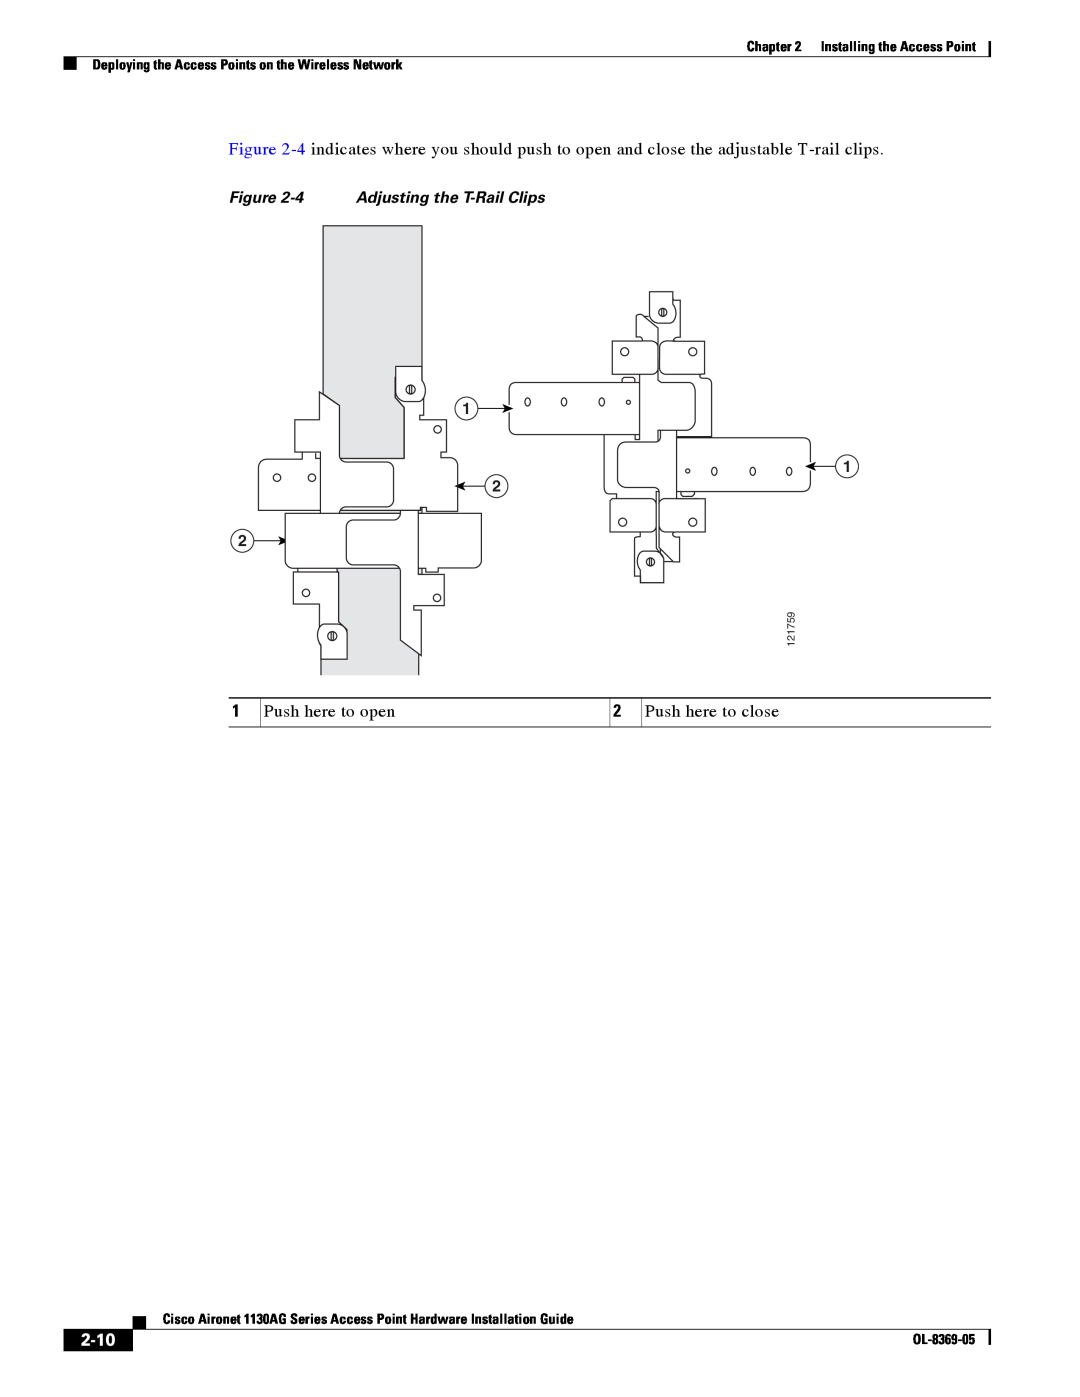 Cisco Systems 1130AG manual 2-10, 4 Adjusting the T-Rail Clips, Installing the Access Point, OL-8369-05, 121759 